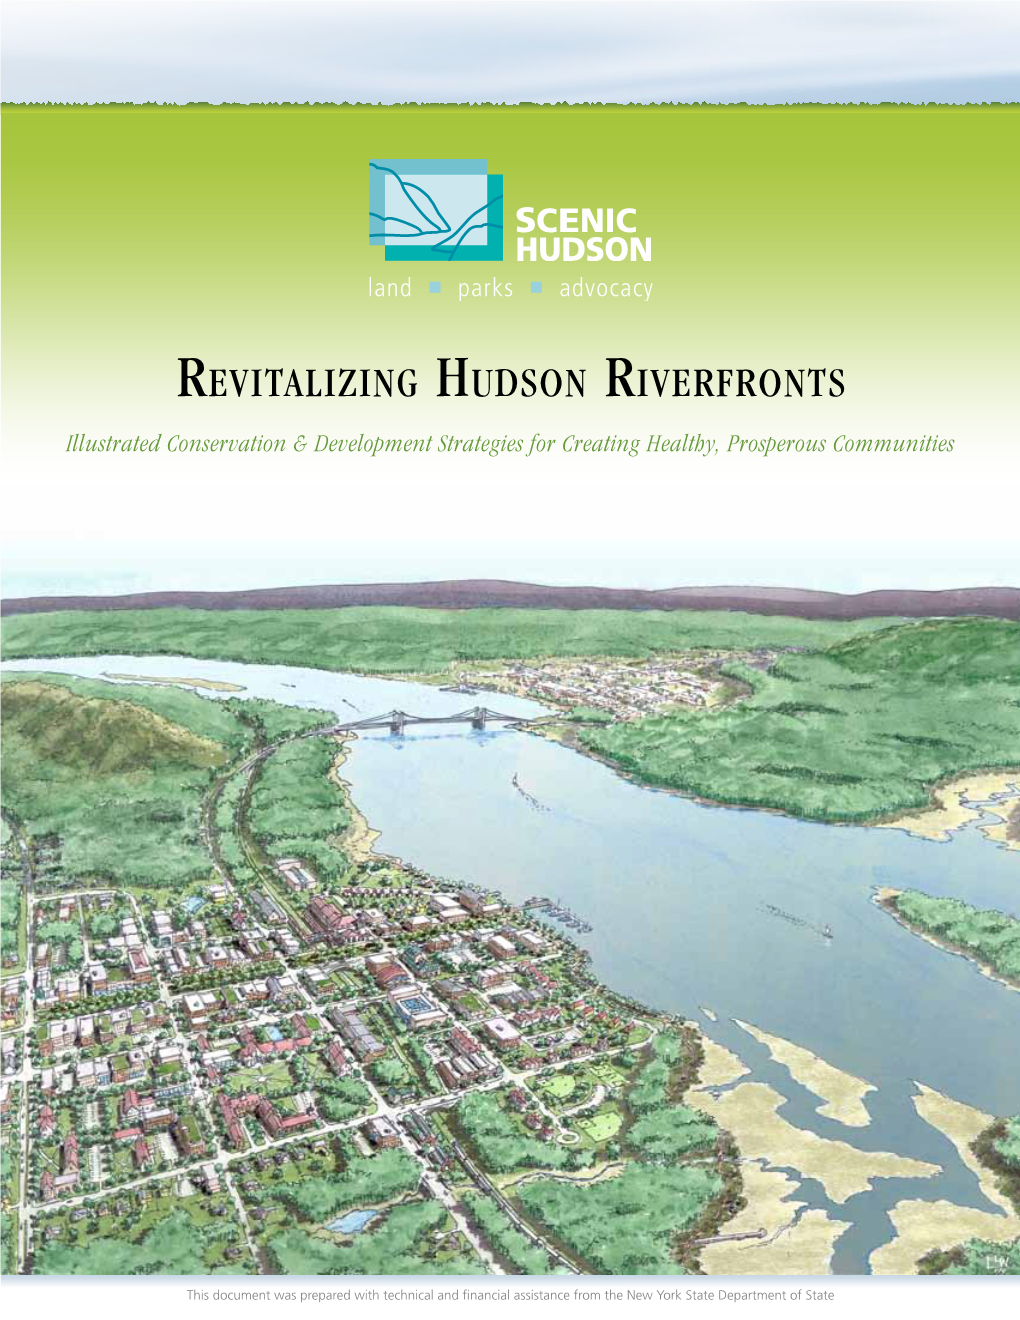 Revitalizing Hudson Riverfronts Illustrated Conservation & Development Strategies for Creating Healthy, Prosperous Communities